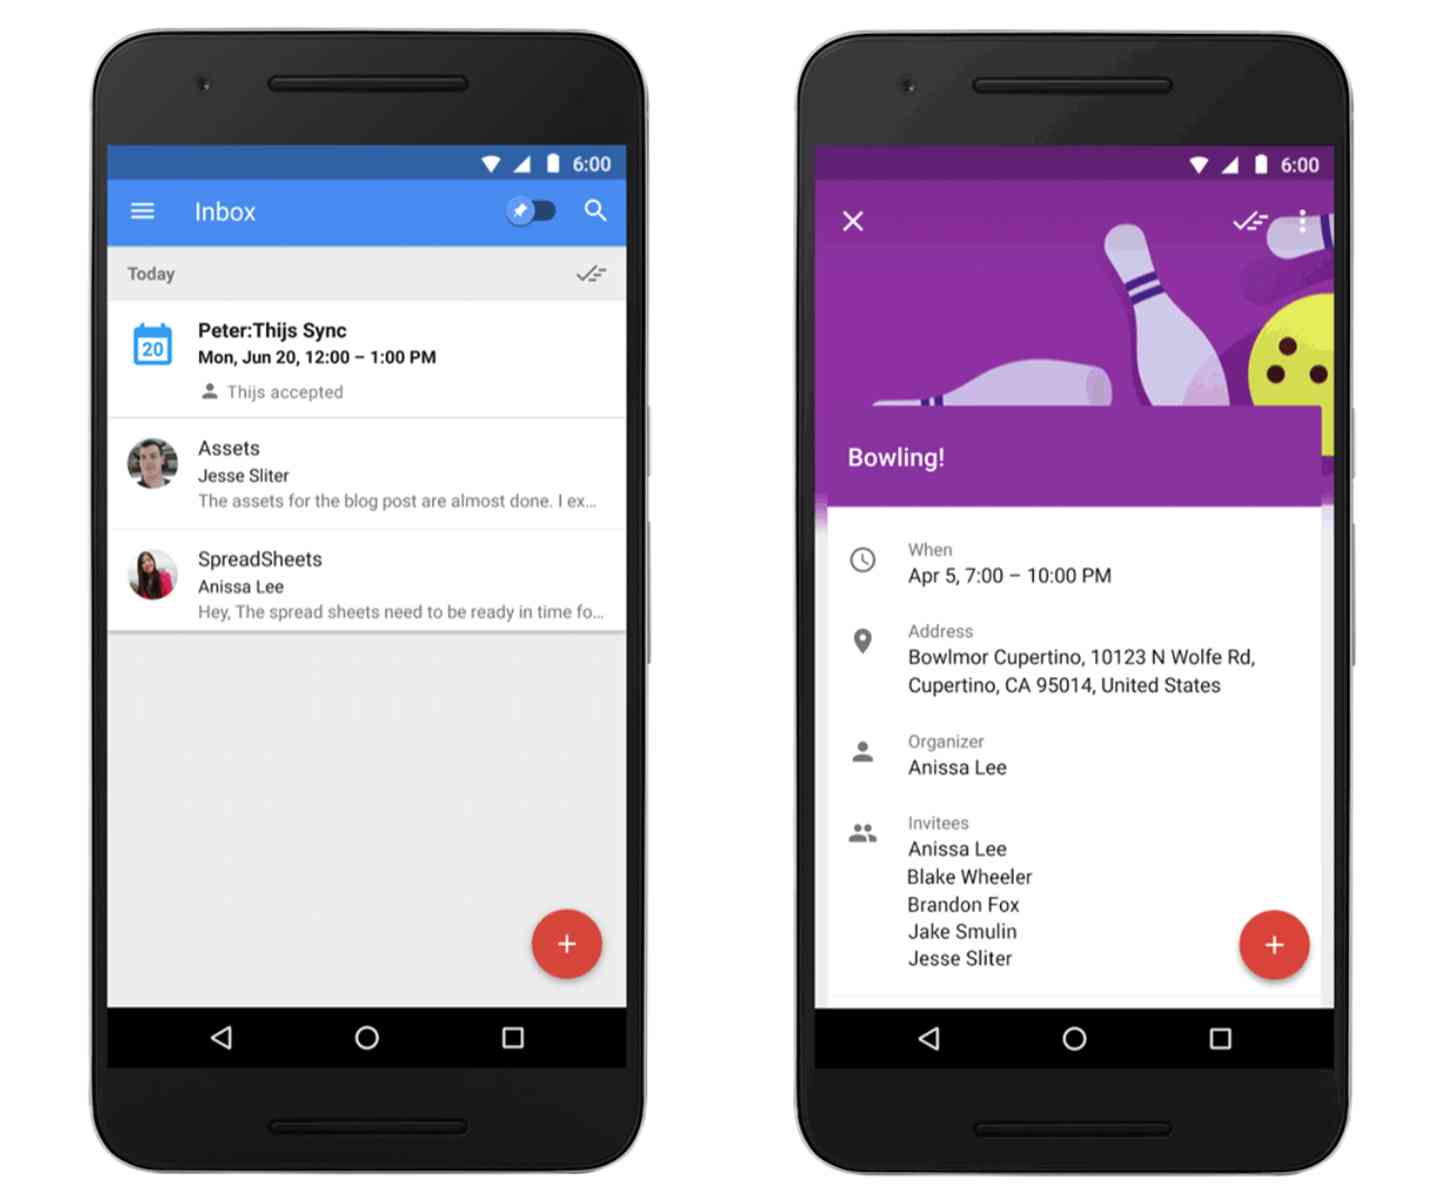 Inbox by Gmail event summary